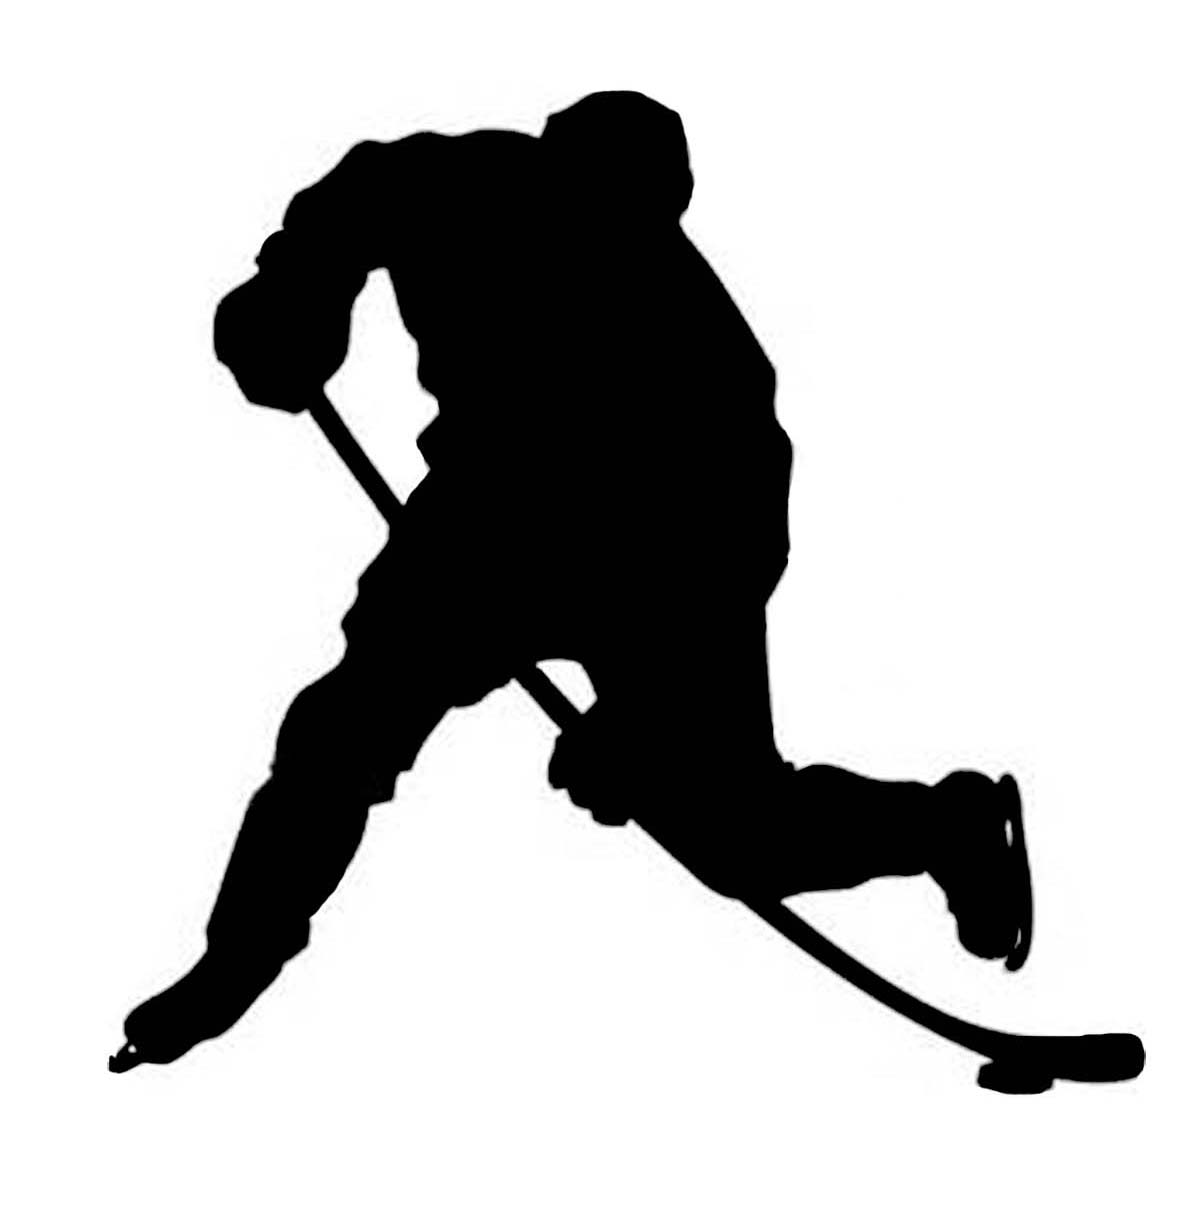 Displaying 20  Images For   Hockey Player Shooting Silhouette   